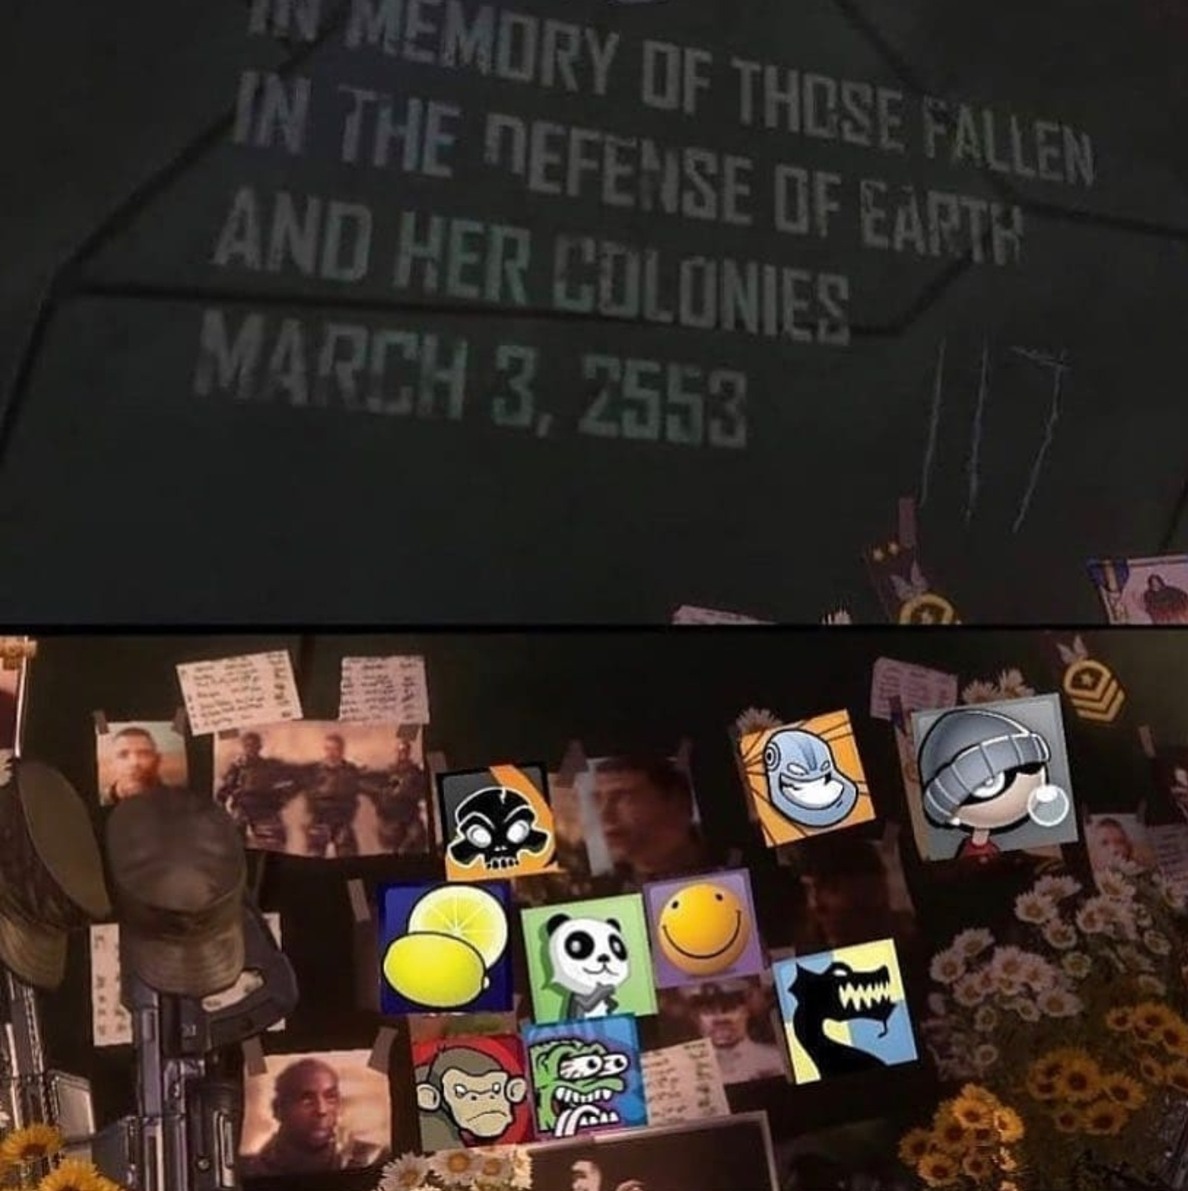 Press F to pay respects - Meme by C0l :) Memedroid